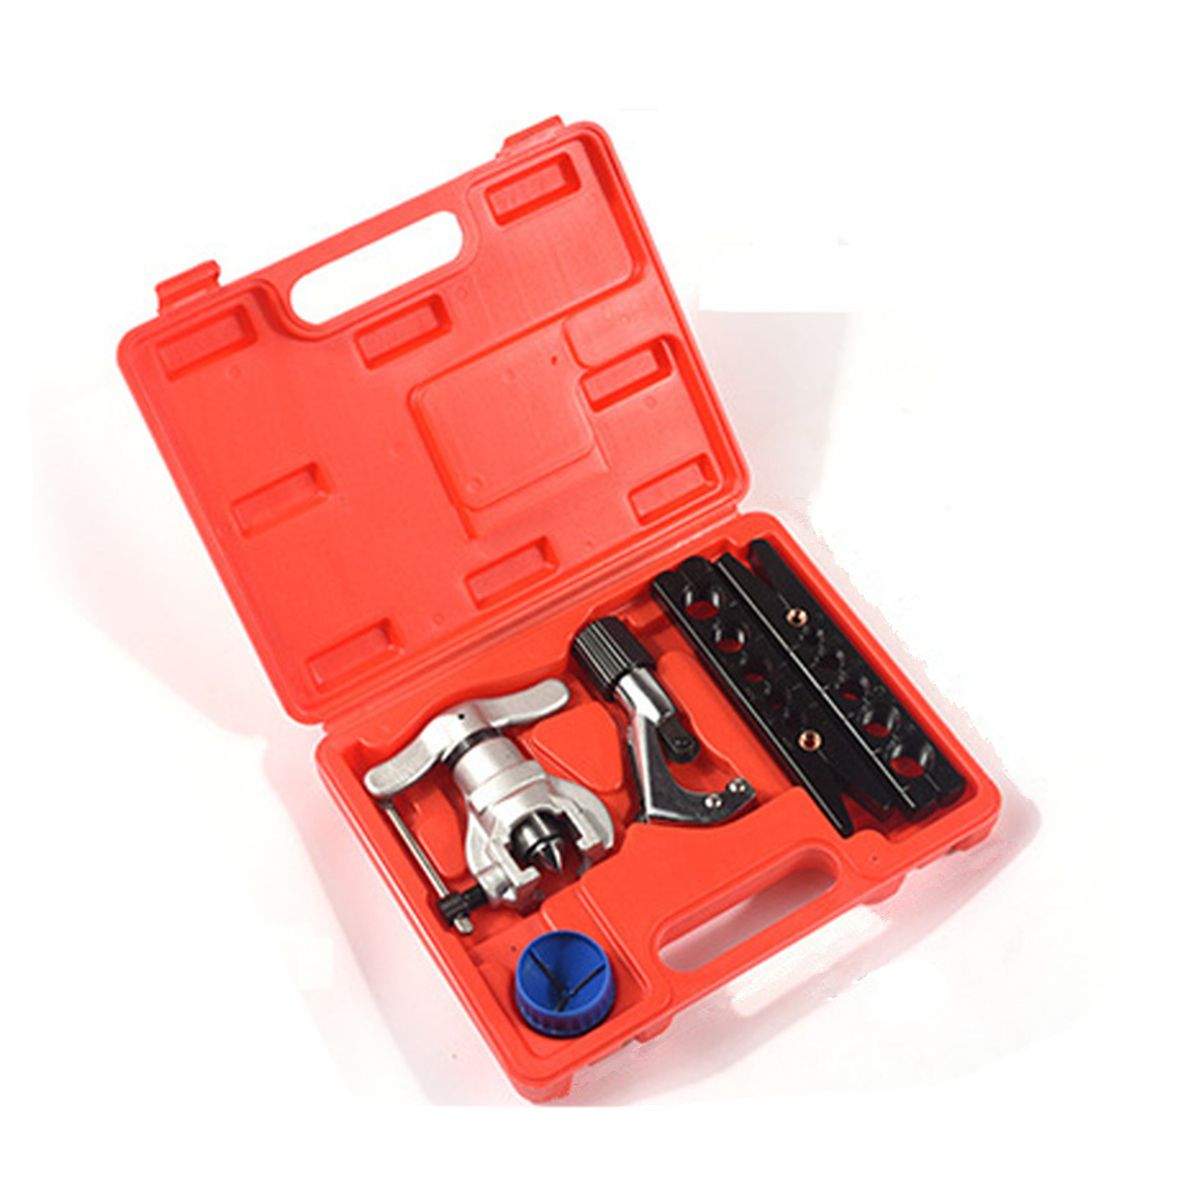 Eccentric-Flaring-Tools-Kit-Flare-Copper-Tube-Pipe-Cutter-Air-Conditioning-Debure-1326235